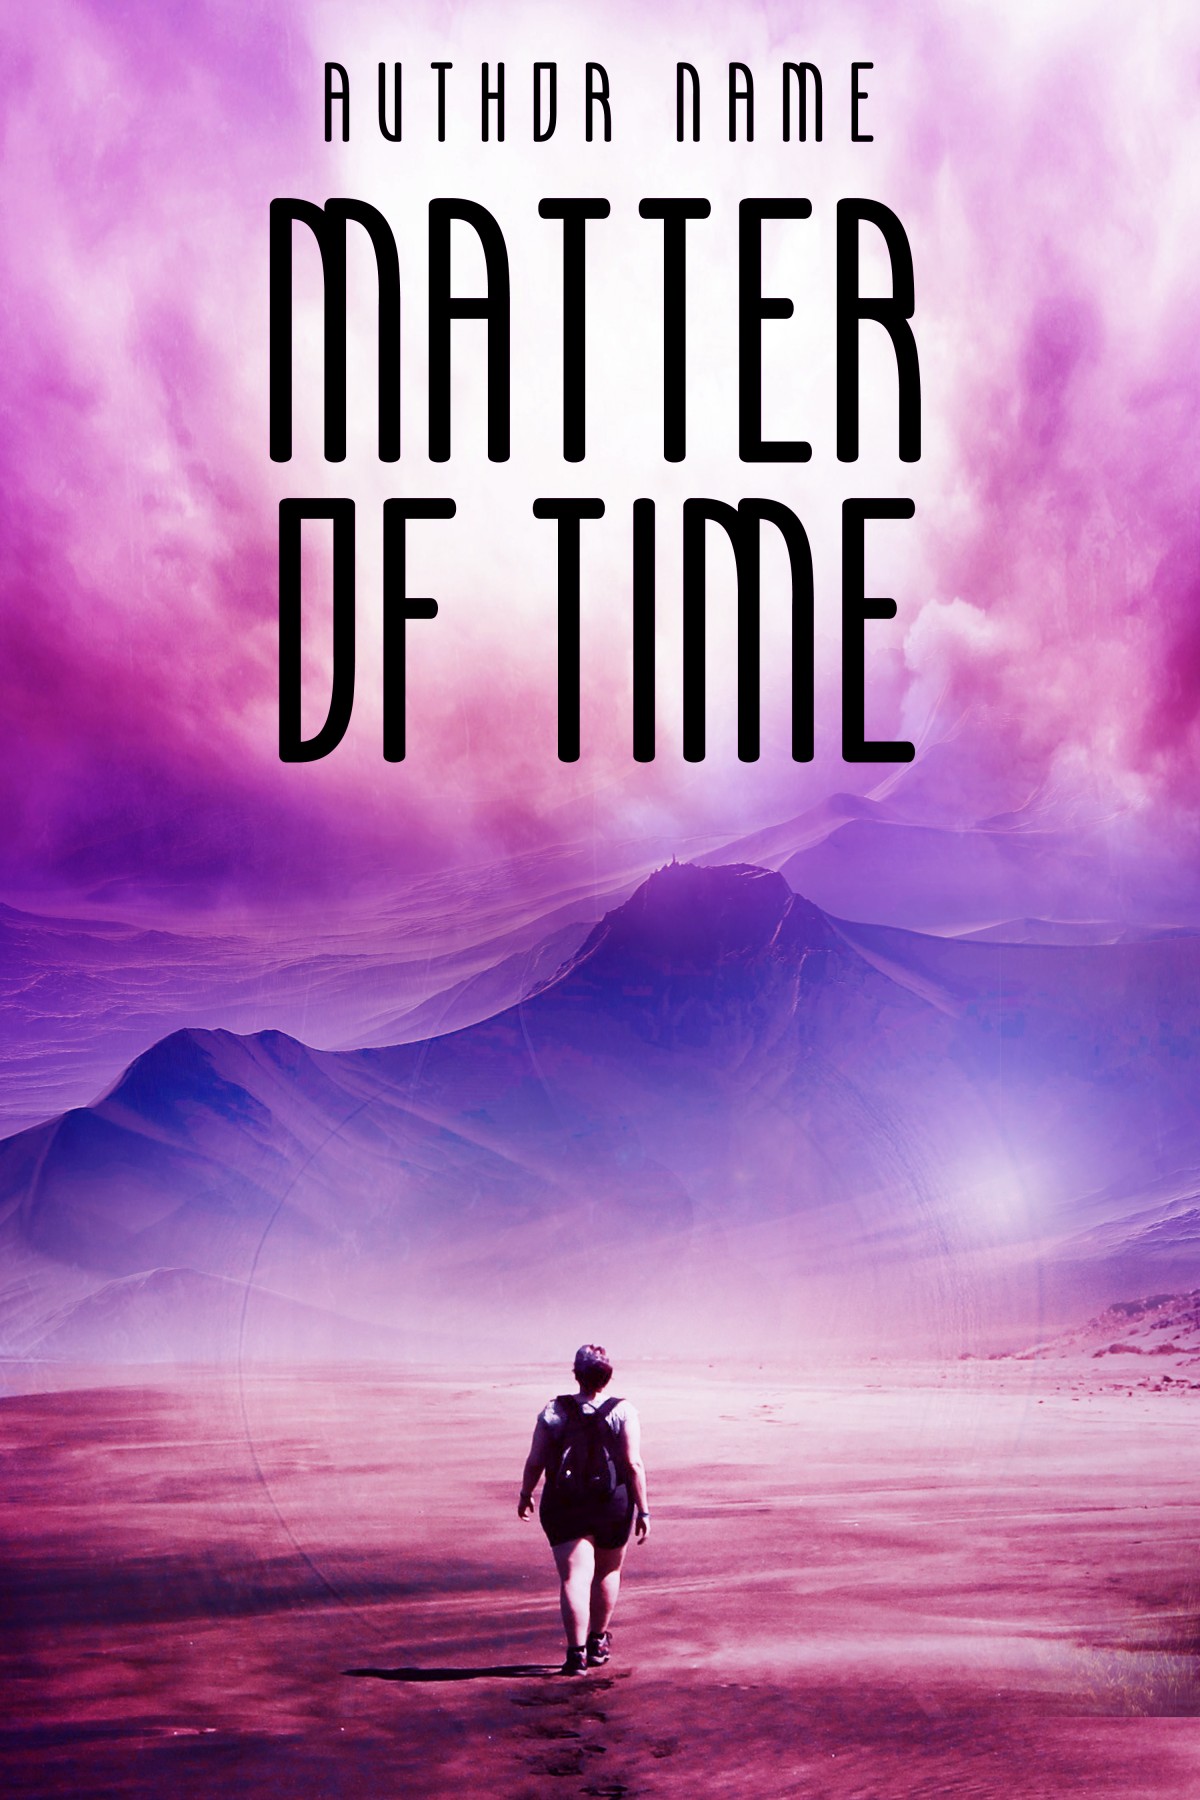 A Matter of Time Book III by Mary Calmes